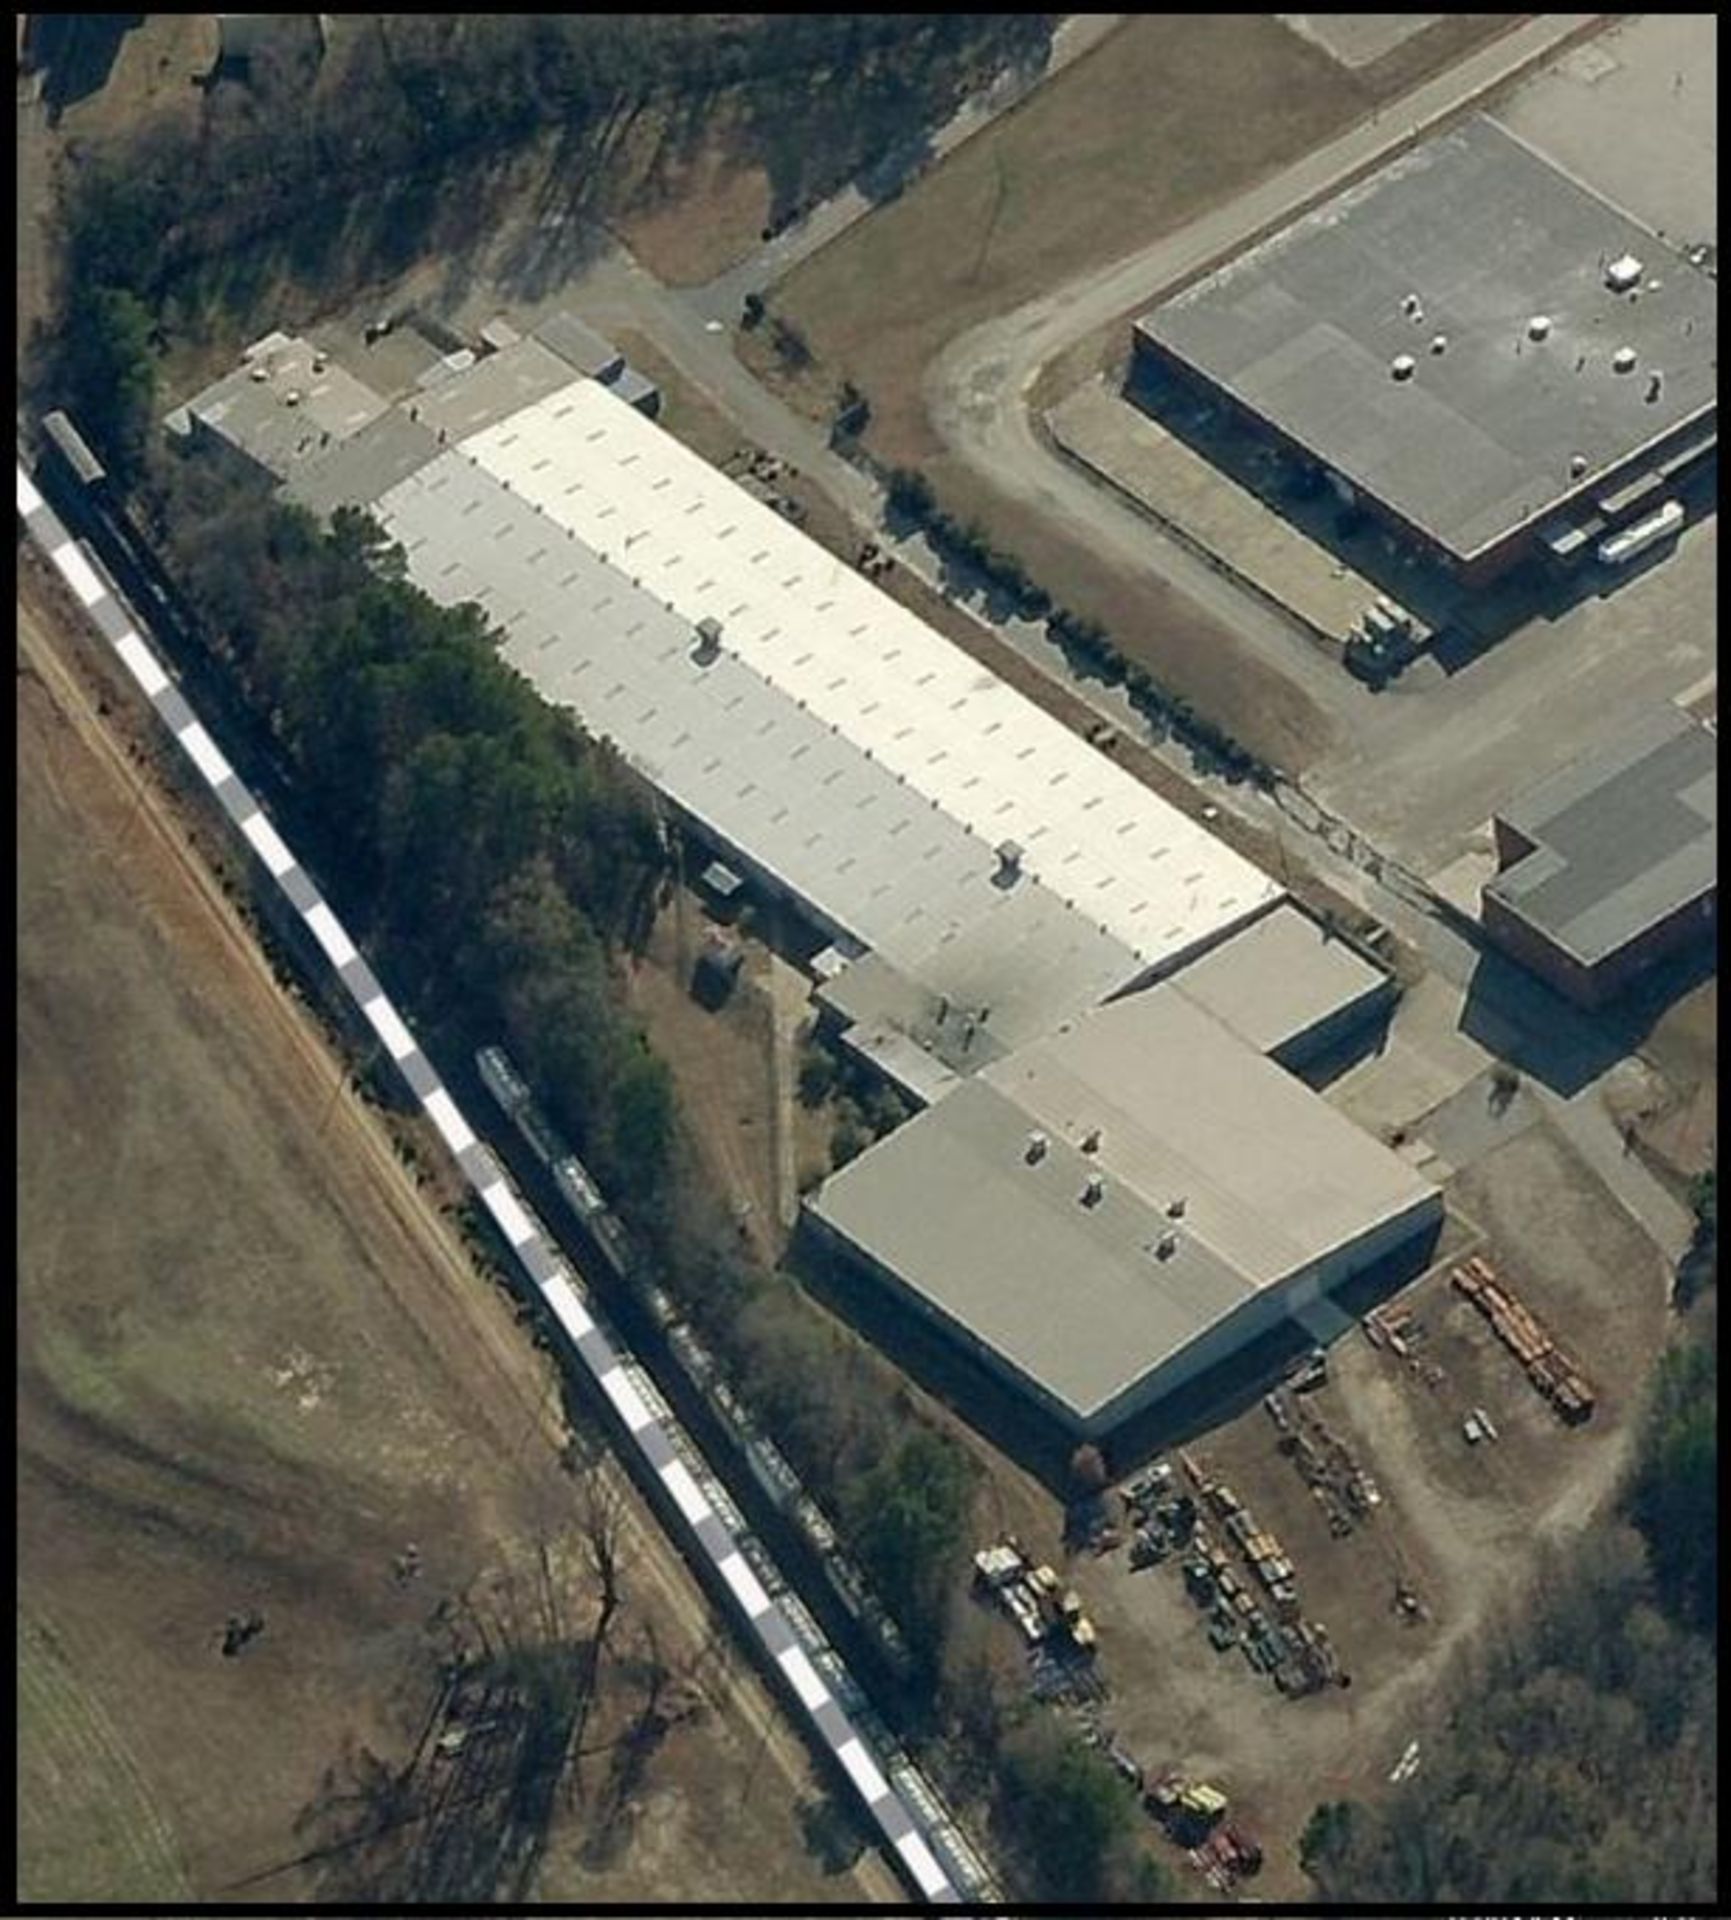 109 McNeill Rd, Sanford, NC 27330 145,636 SF Crane Served - Image 2 of 11